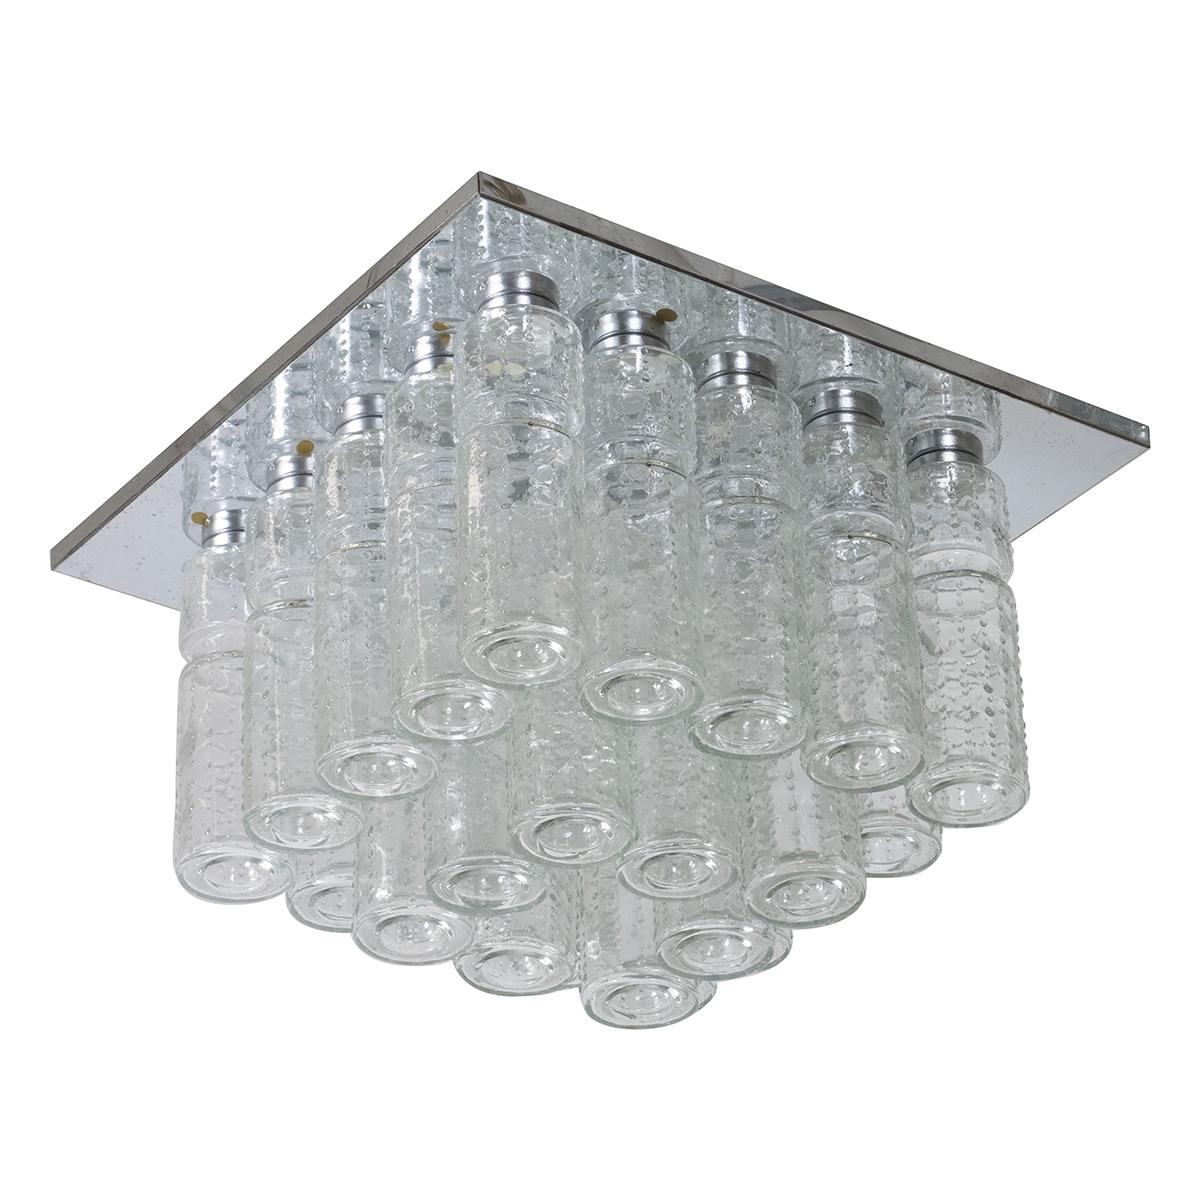 Flush mount fixture composed of multiple molded glass cylindrical elements with nickel frame by Doria.